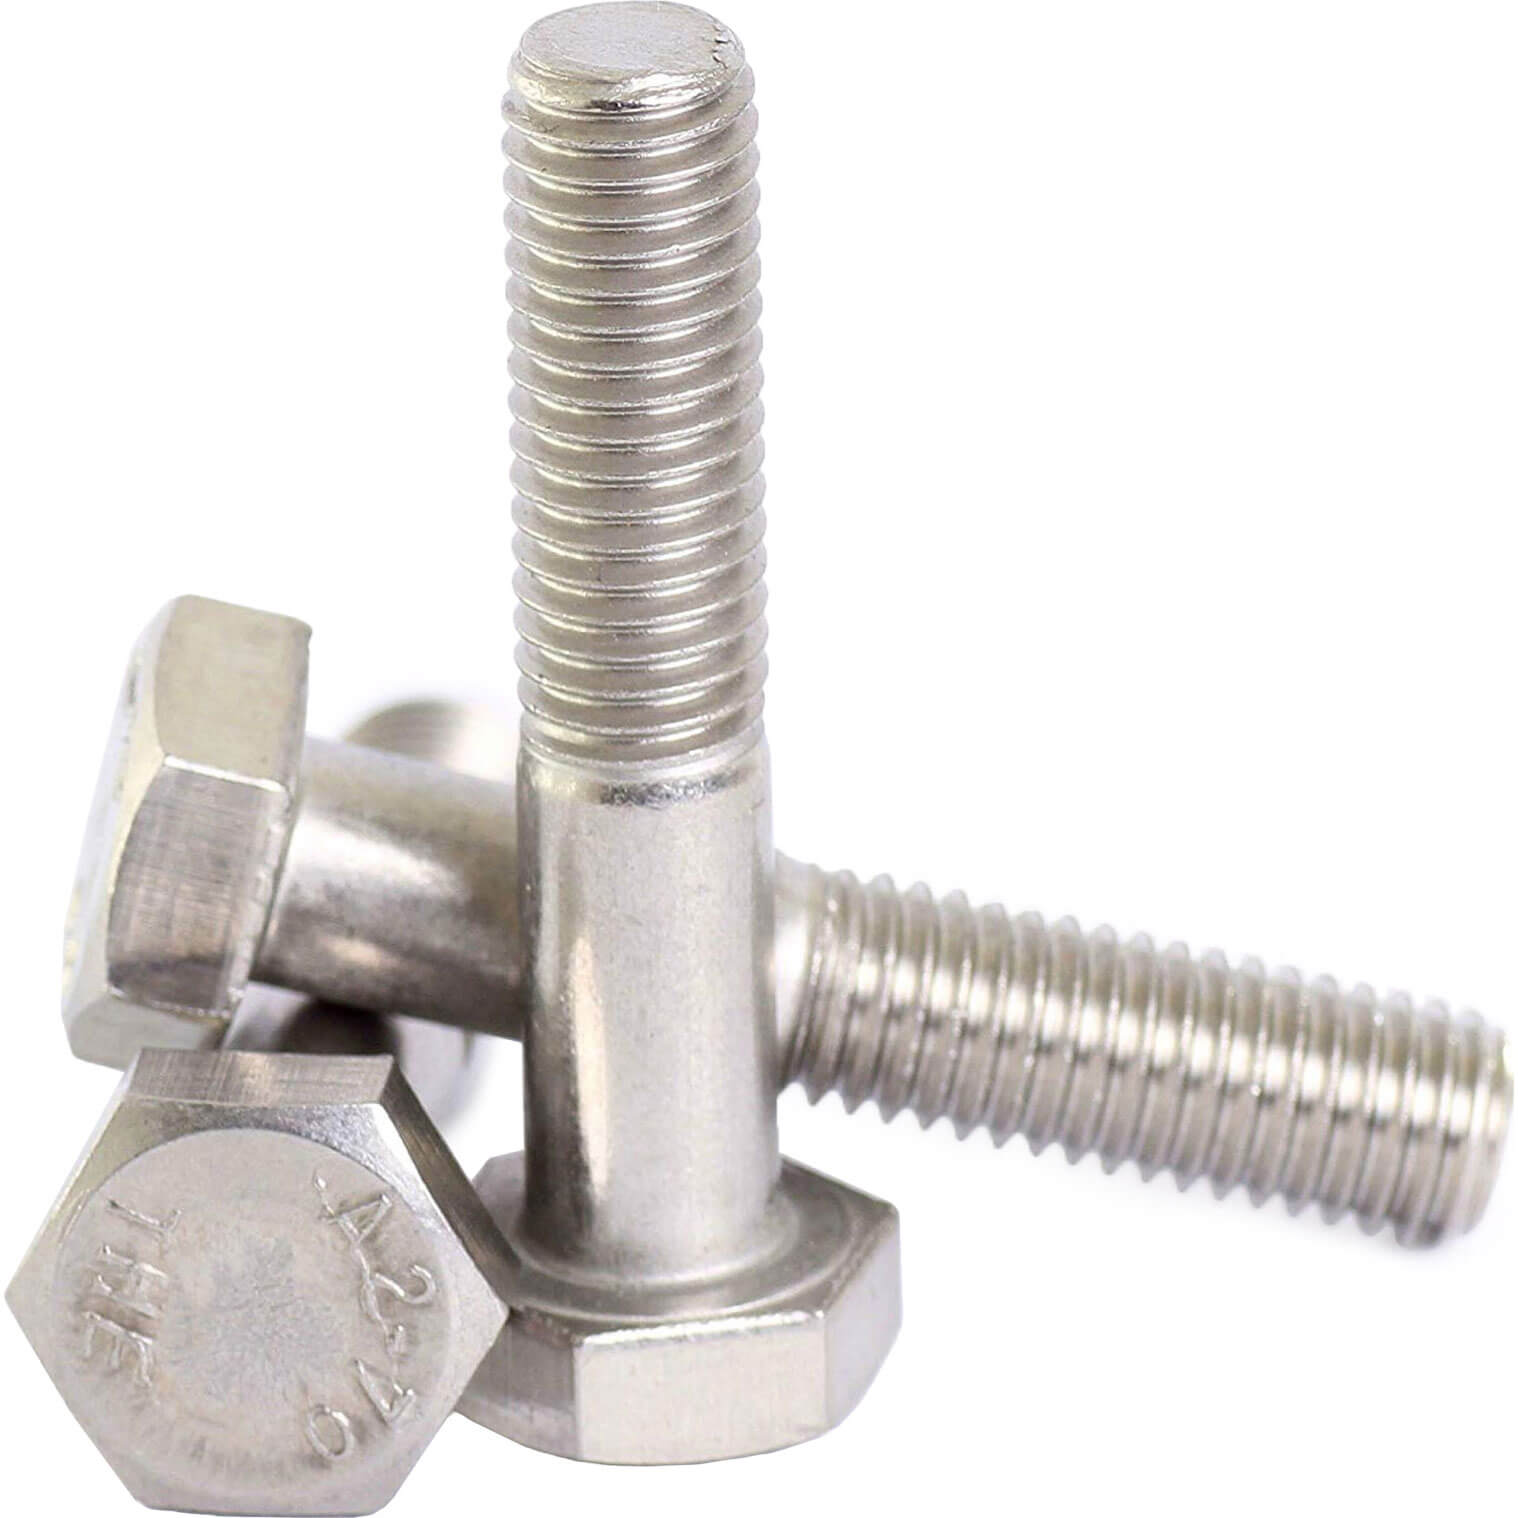 Image of Sirius Bolts A2 304 Stainless Steel M16 120mm Pack of 1